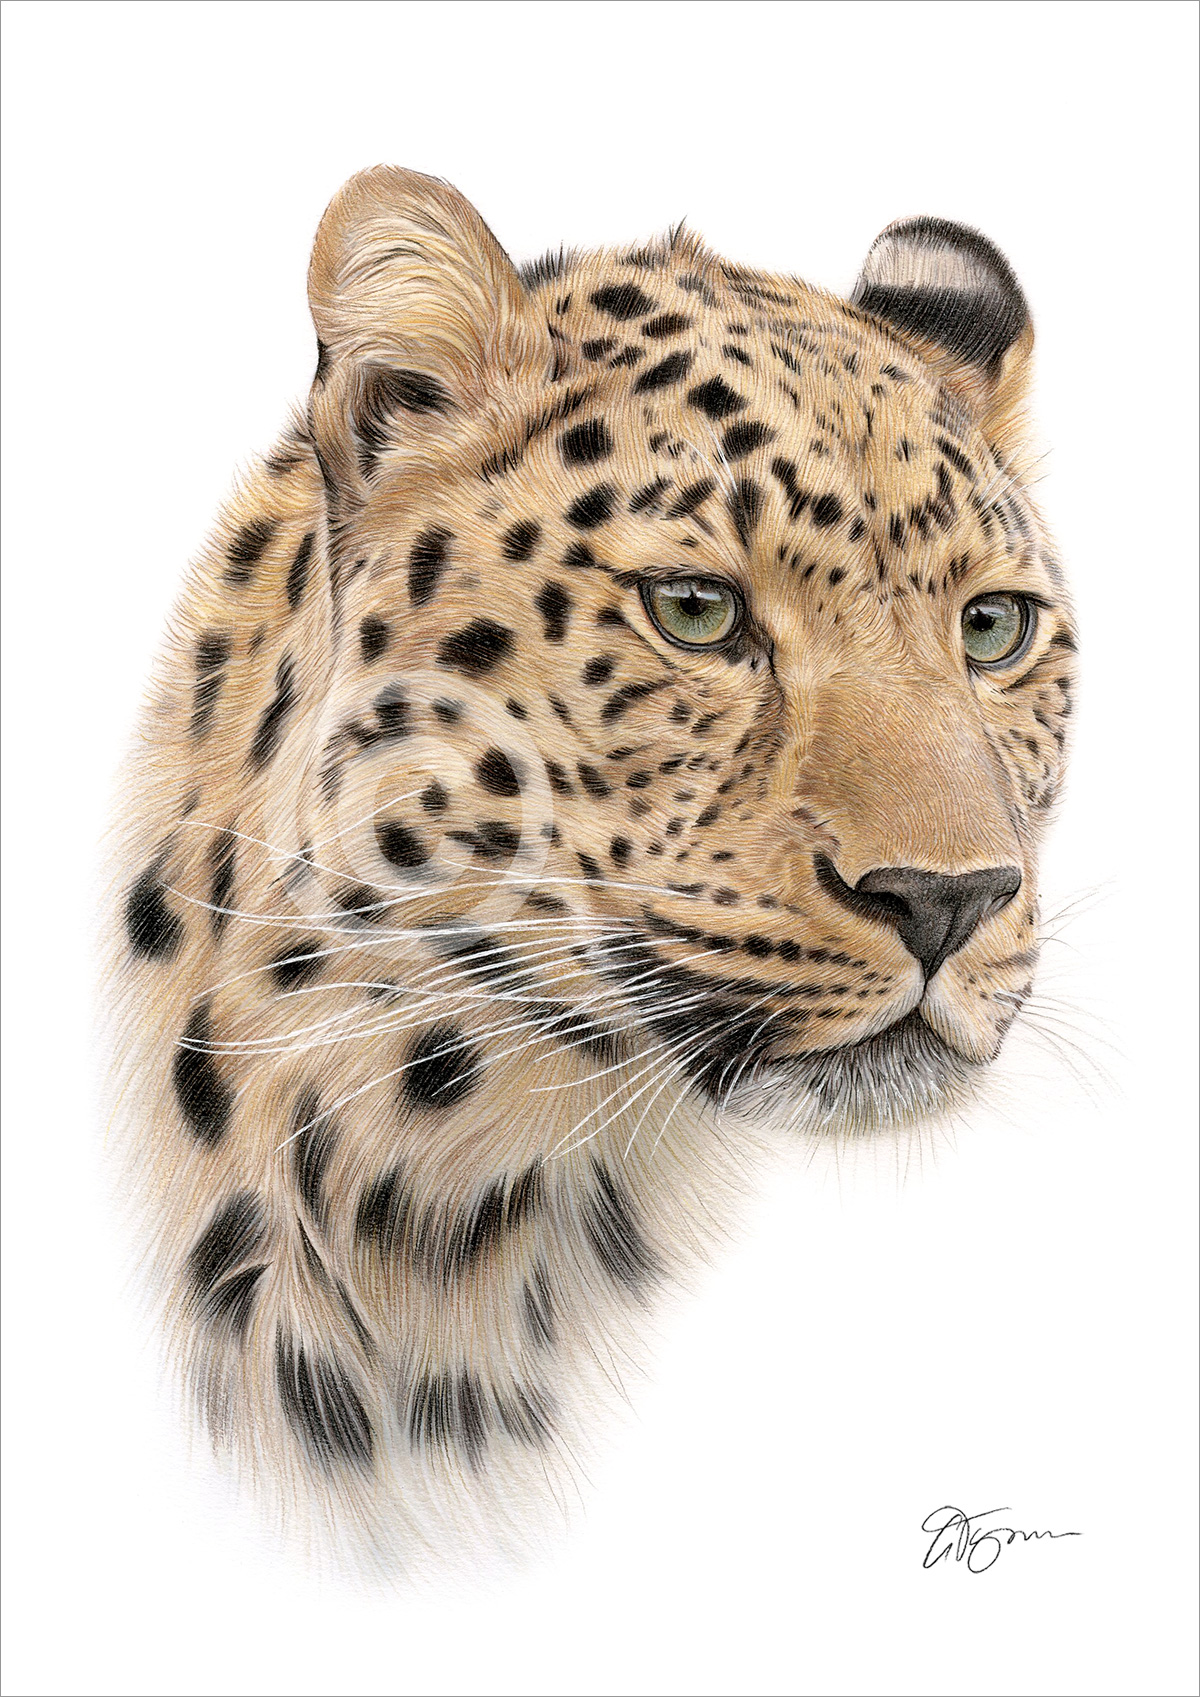 Colour pencil drawing of a leopard in portrait by artist Gary Tymon